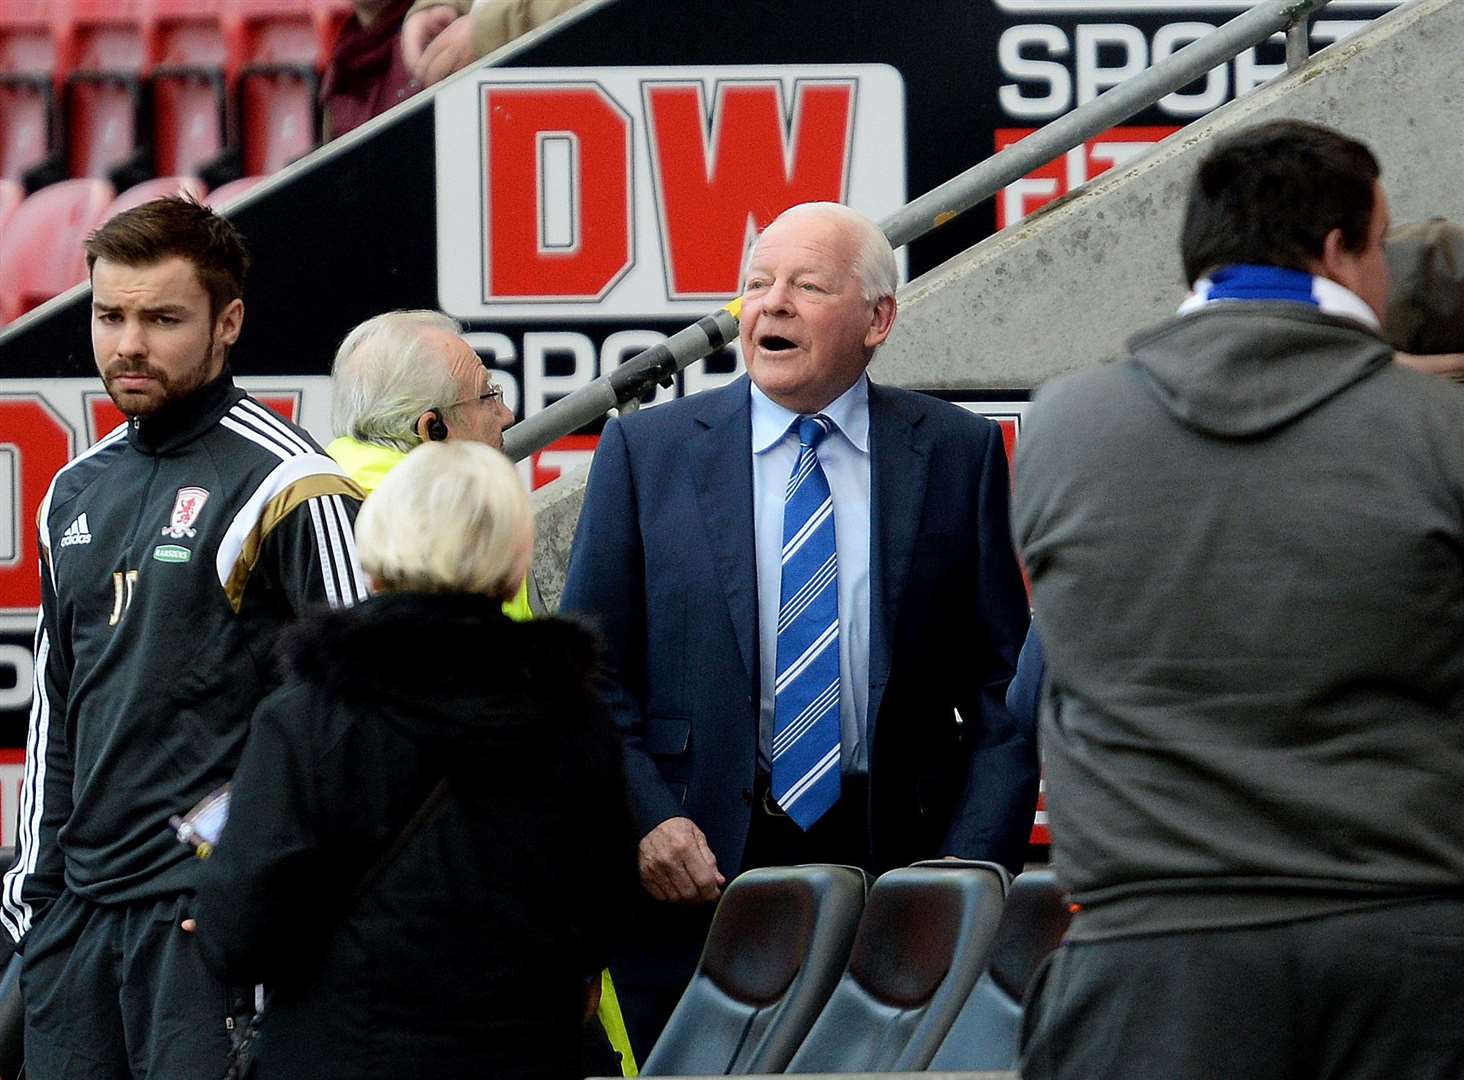 The company was founded by former Wigan Athletic owner Dave Whelan (Anna Gowthorpe/PA)